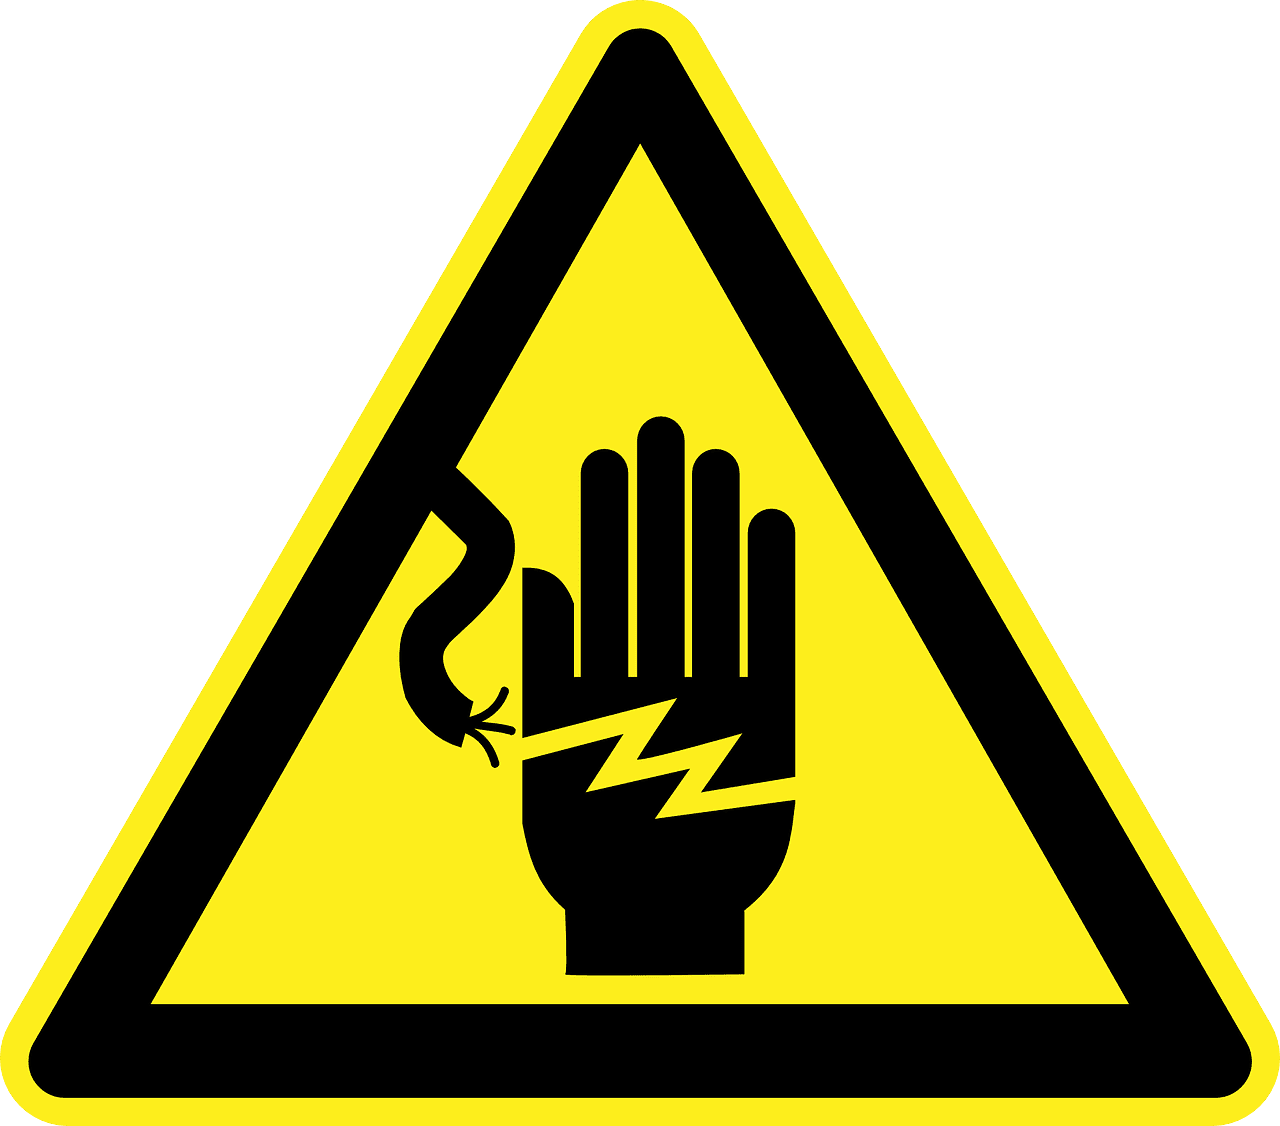 Prevention of electric shocks to electricians